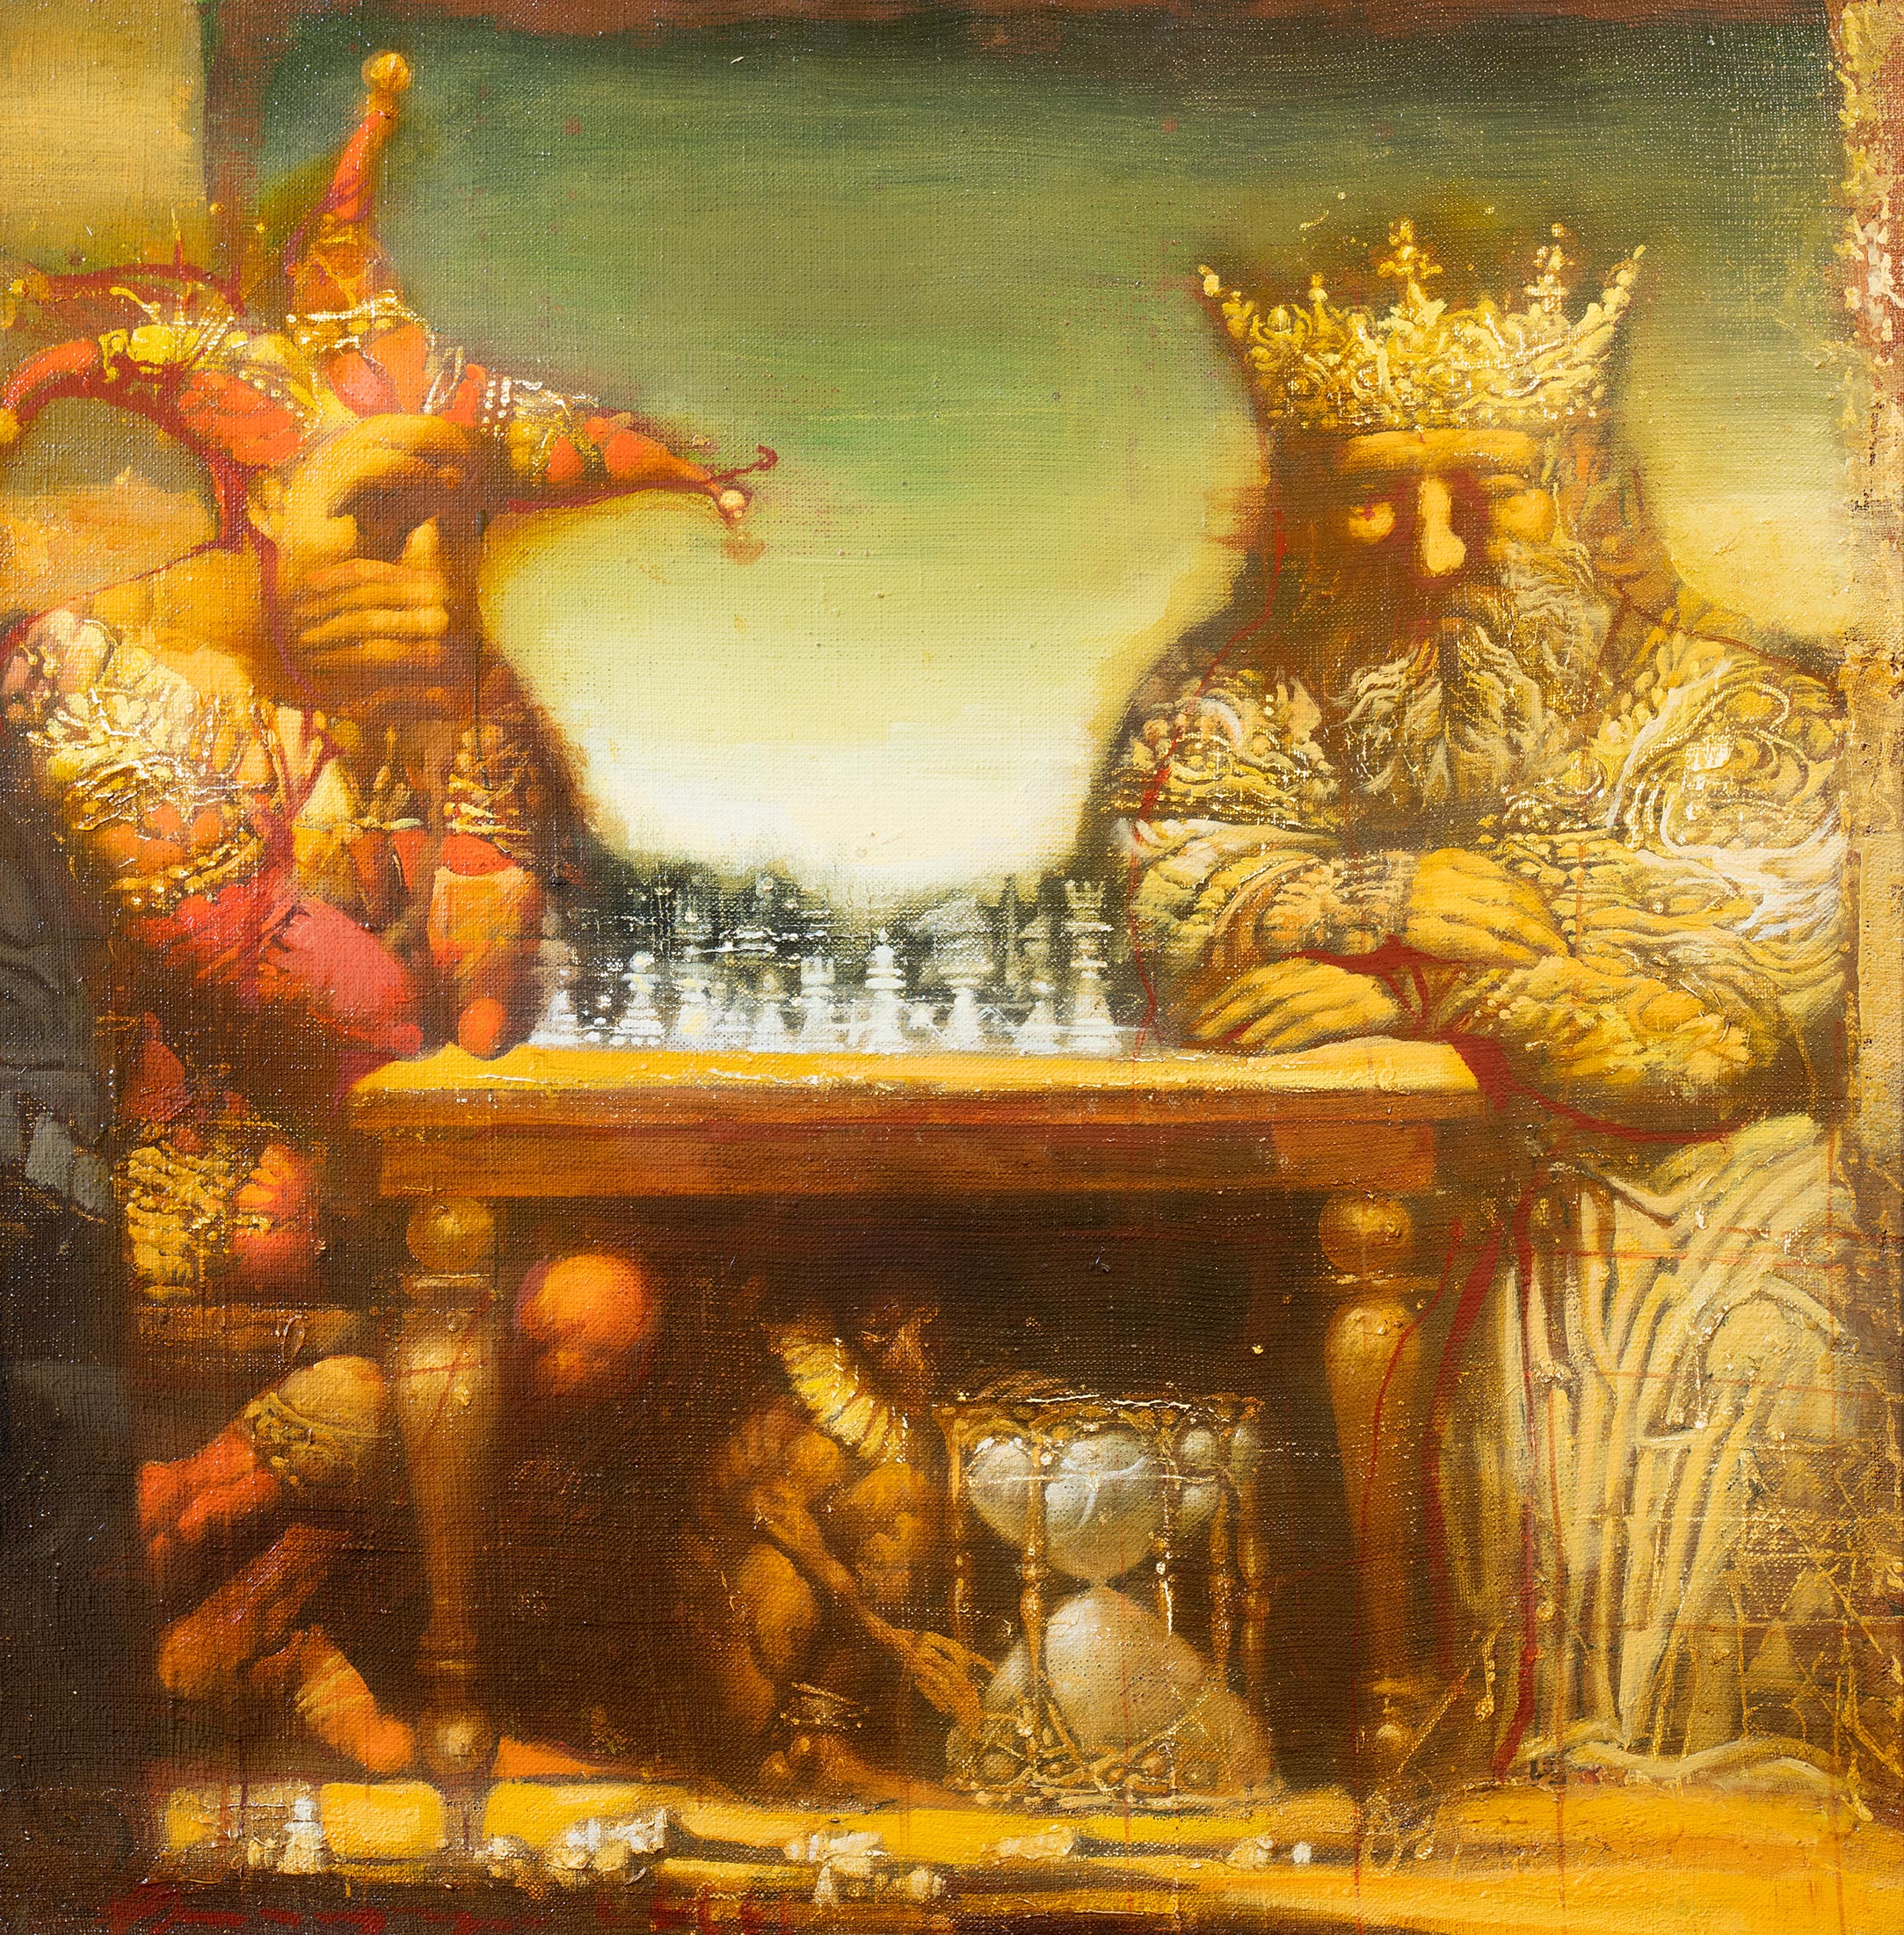 The King and the Clown - 1, Armen Gasparyan, Buy the painting Oil